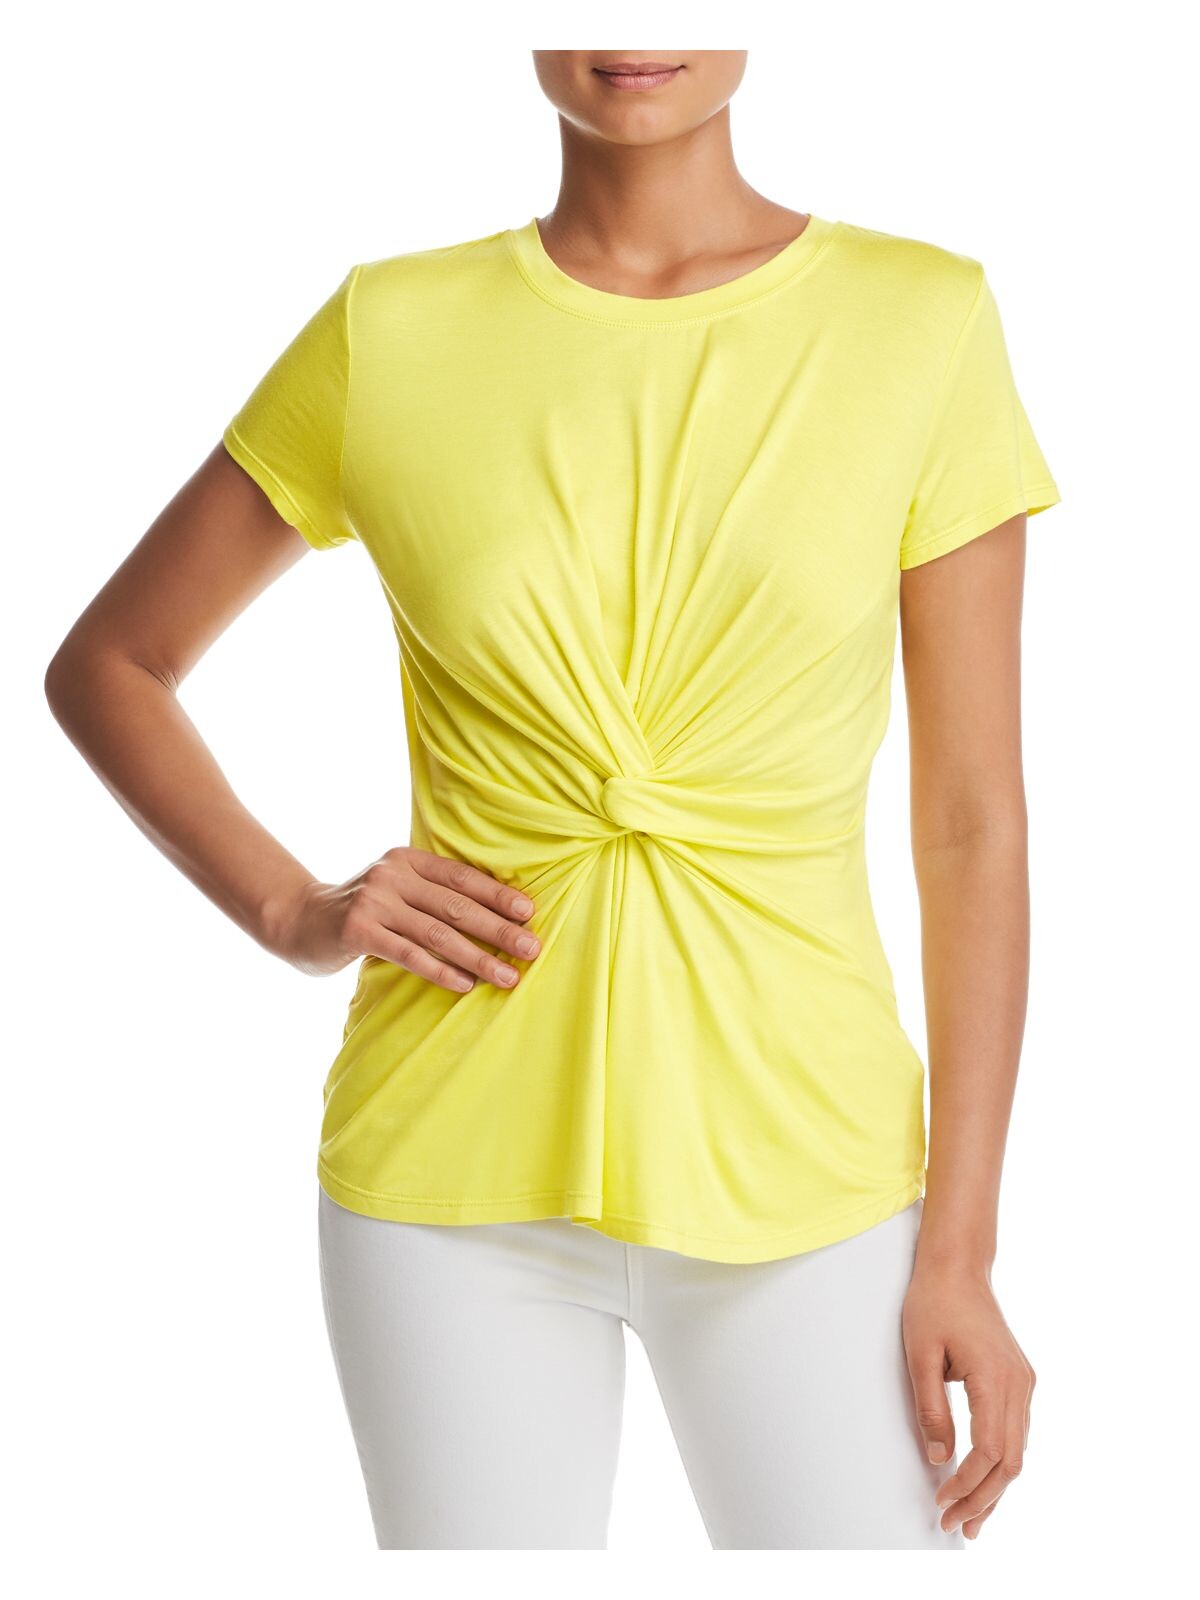 KENNETH COLE NEW YORK Womens Yellow Gathered Faux Knot Short Sleeve Crew Neck Top XS